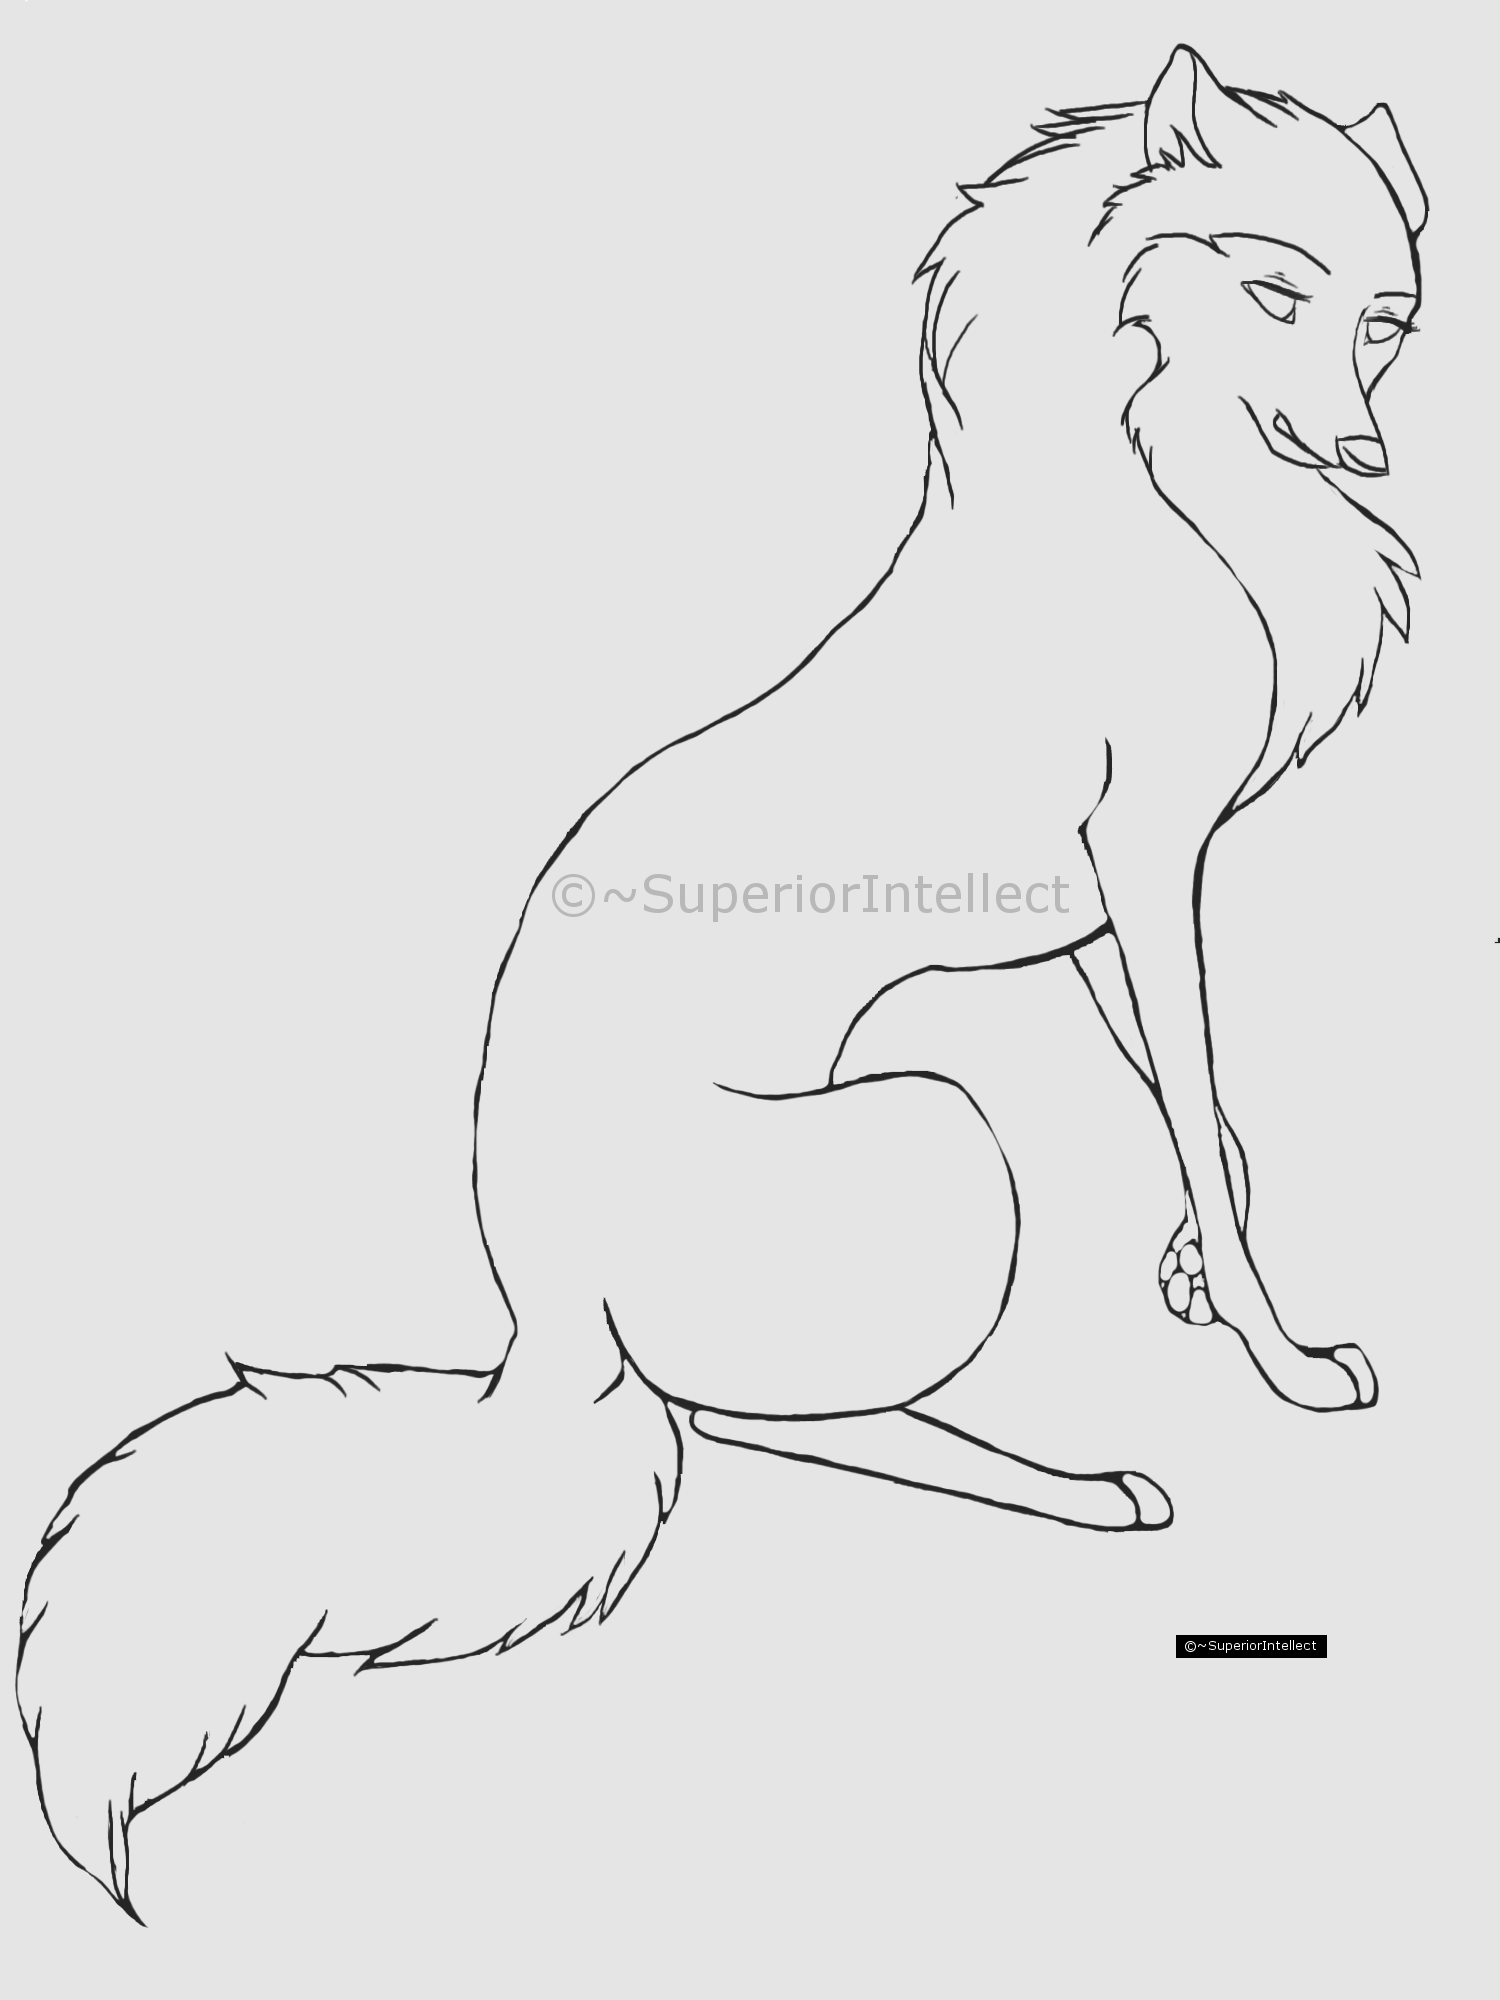 Cartoon wolf or dog line-art by SuperiorIntellect on Clipart library